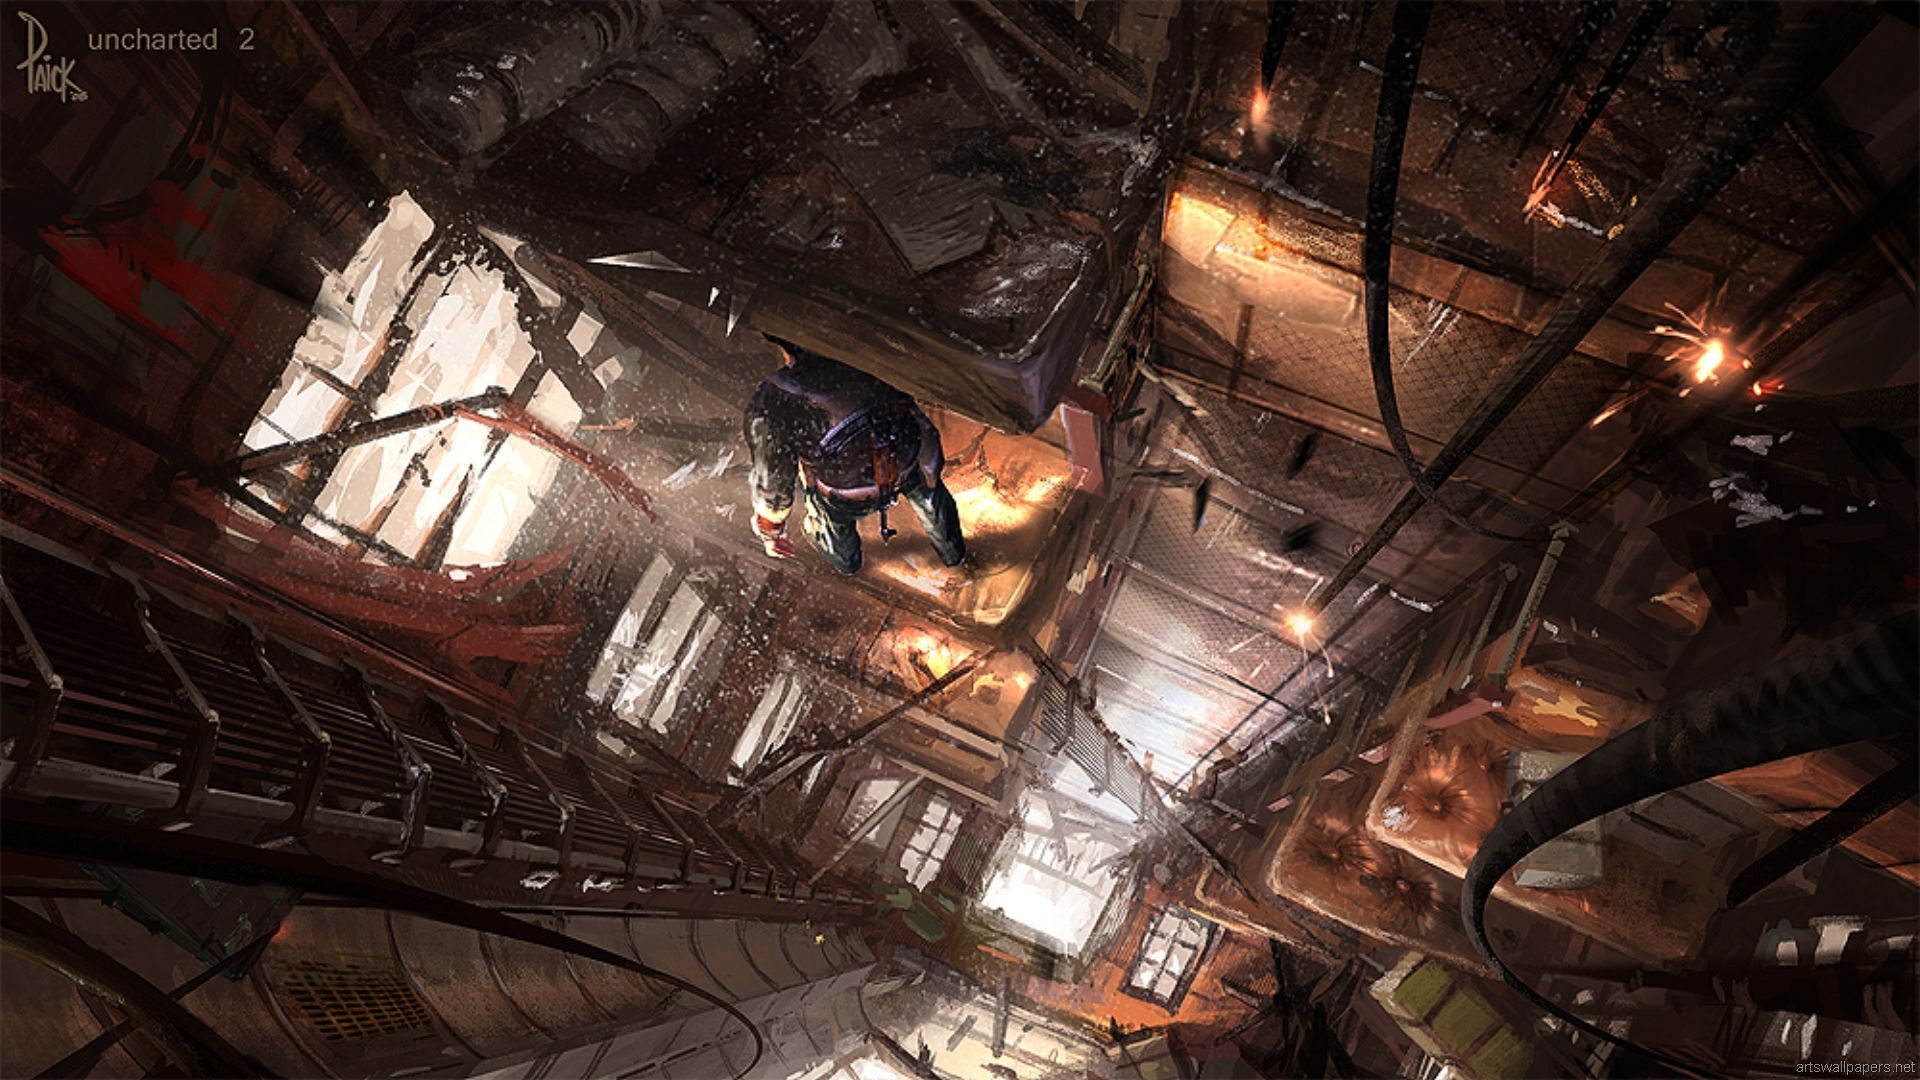 Video Game Uncharted 2 Among Thieves 1920x1080